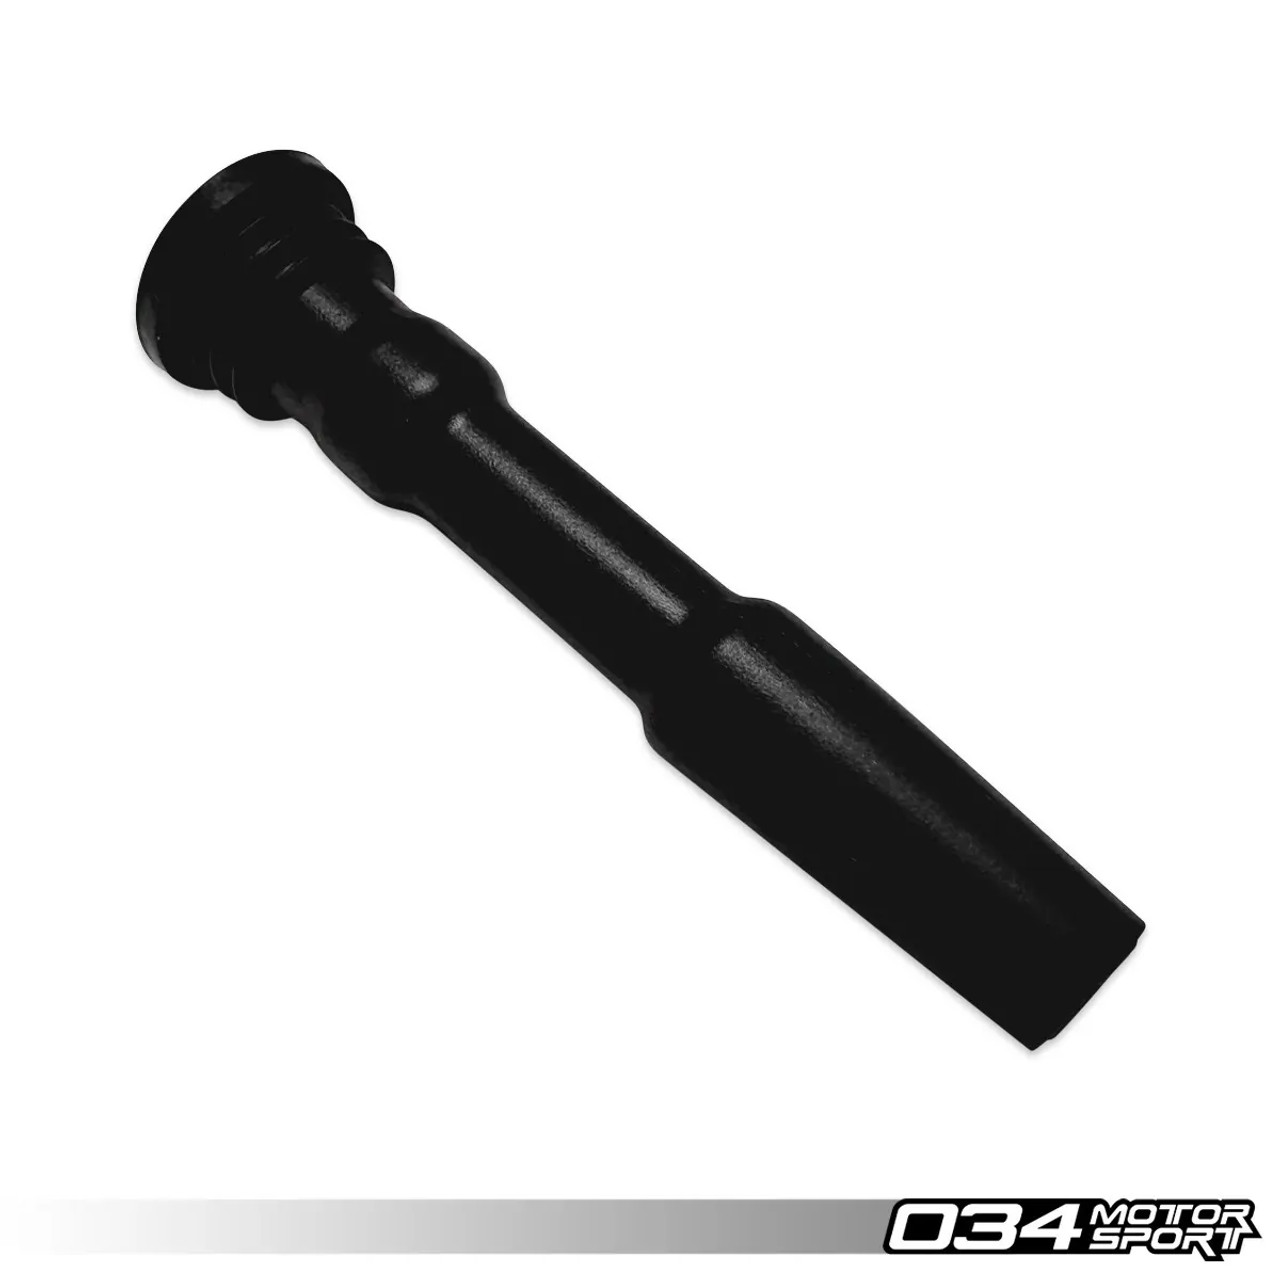 034Motorsport High Output Ignition Coil Replacement Rubber Boot